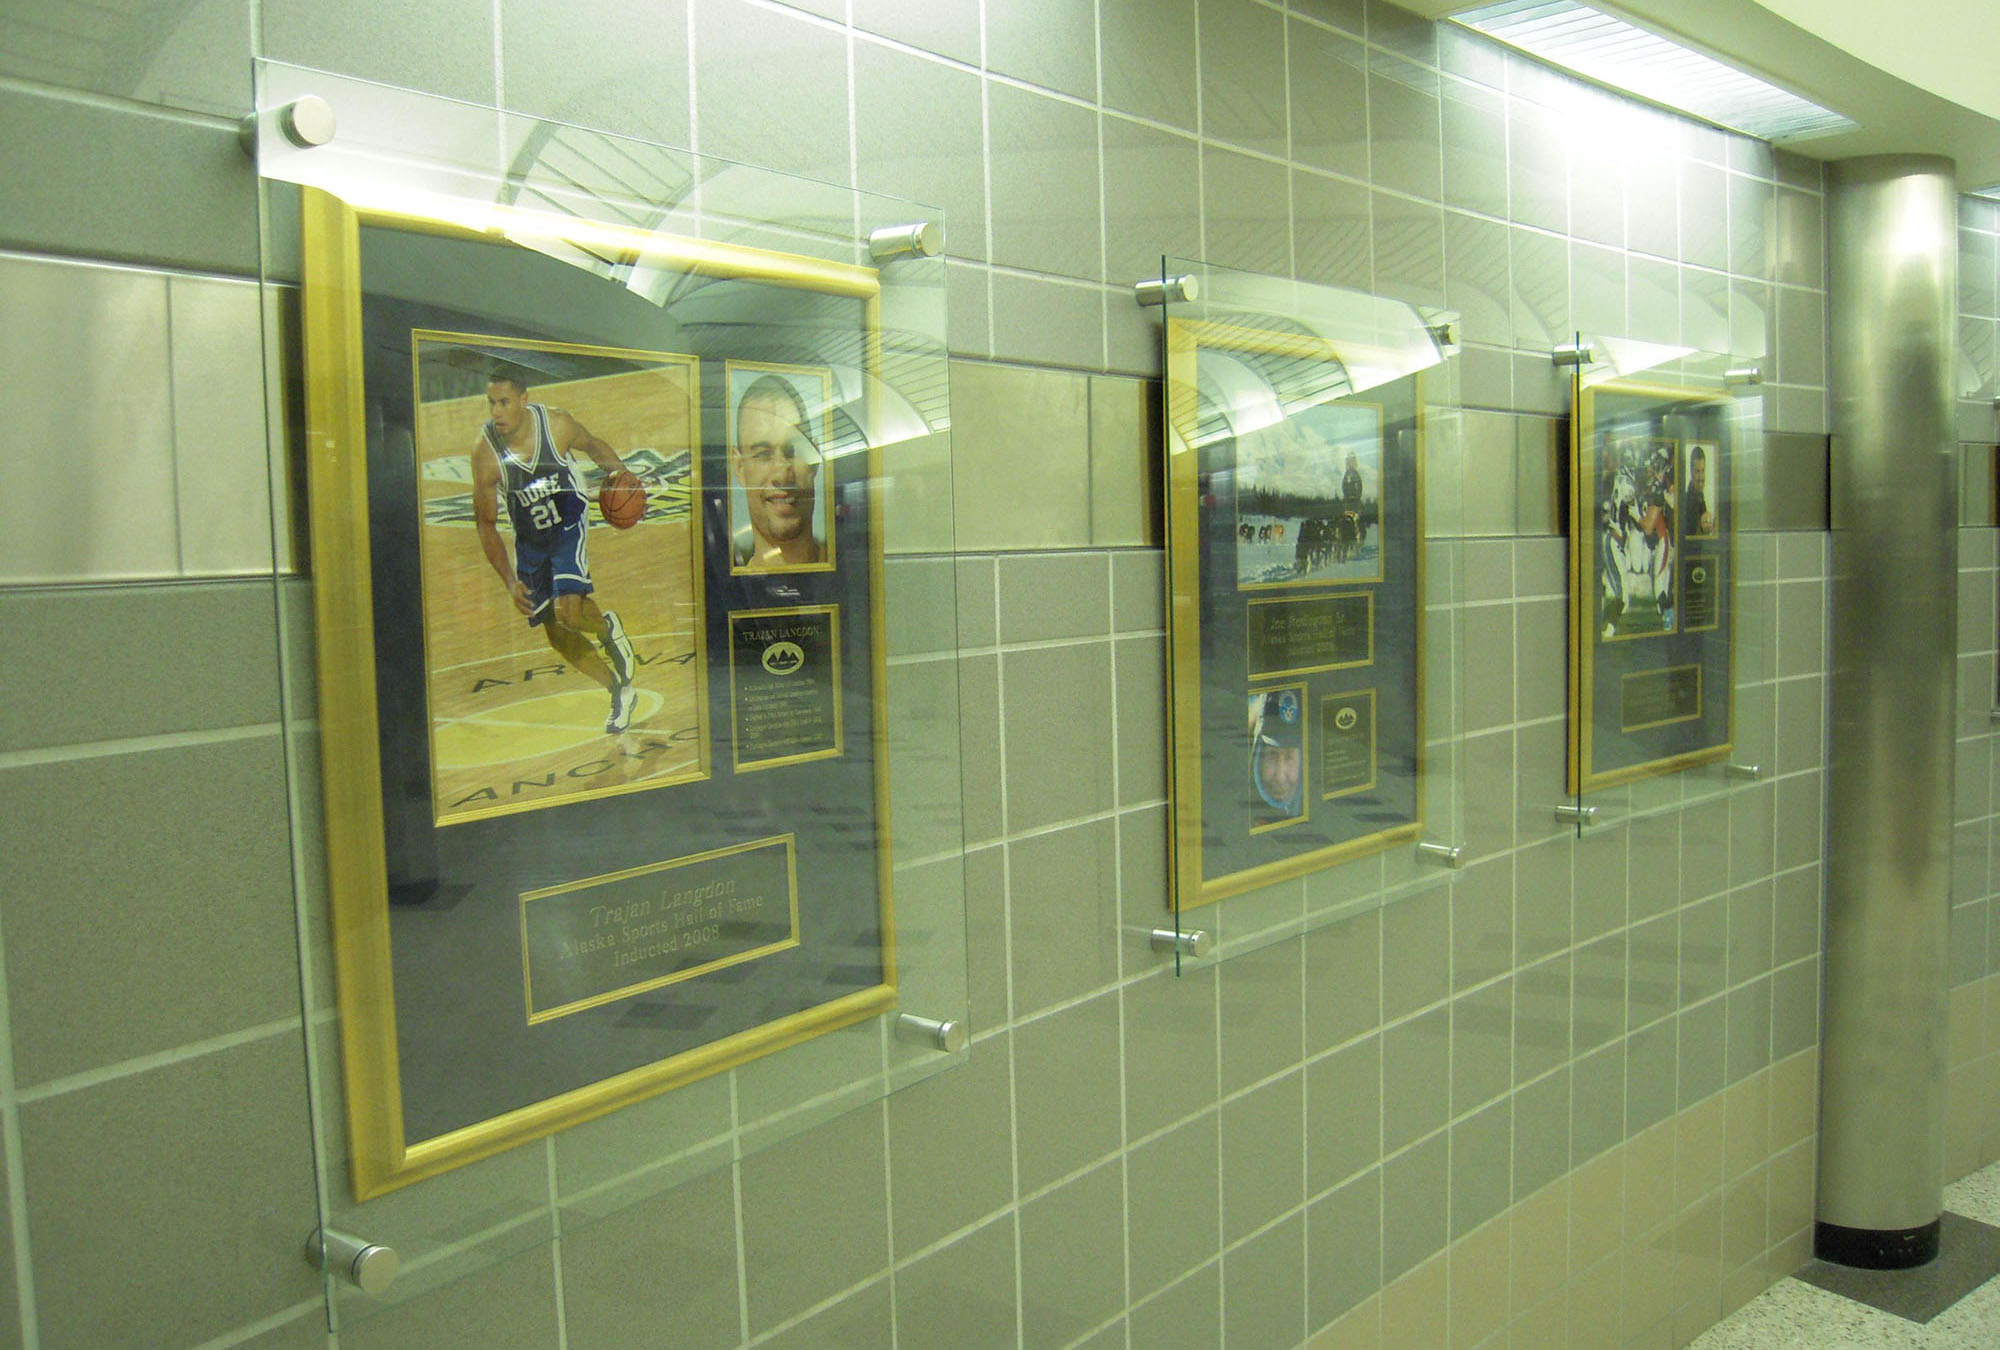 Alaska Sports Hall of Fame Airport Gallery